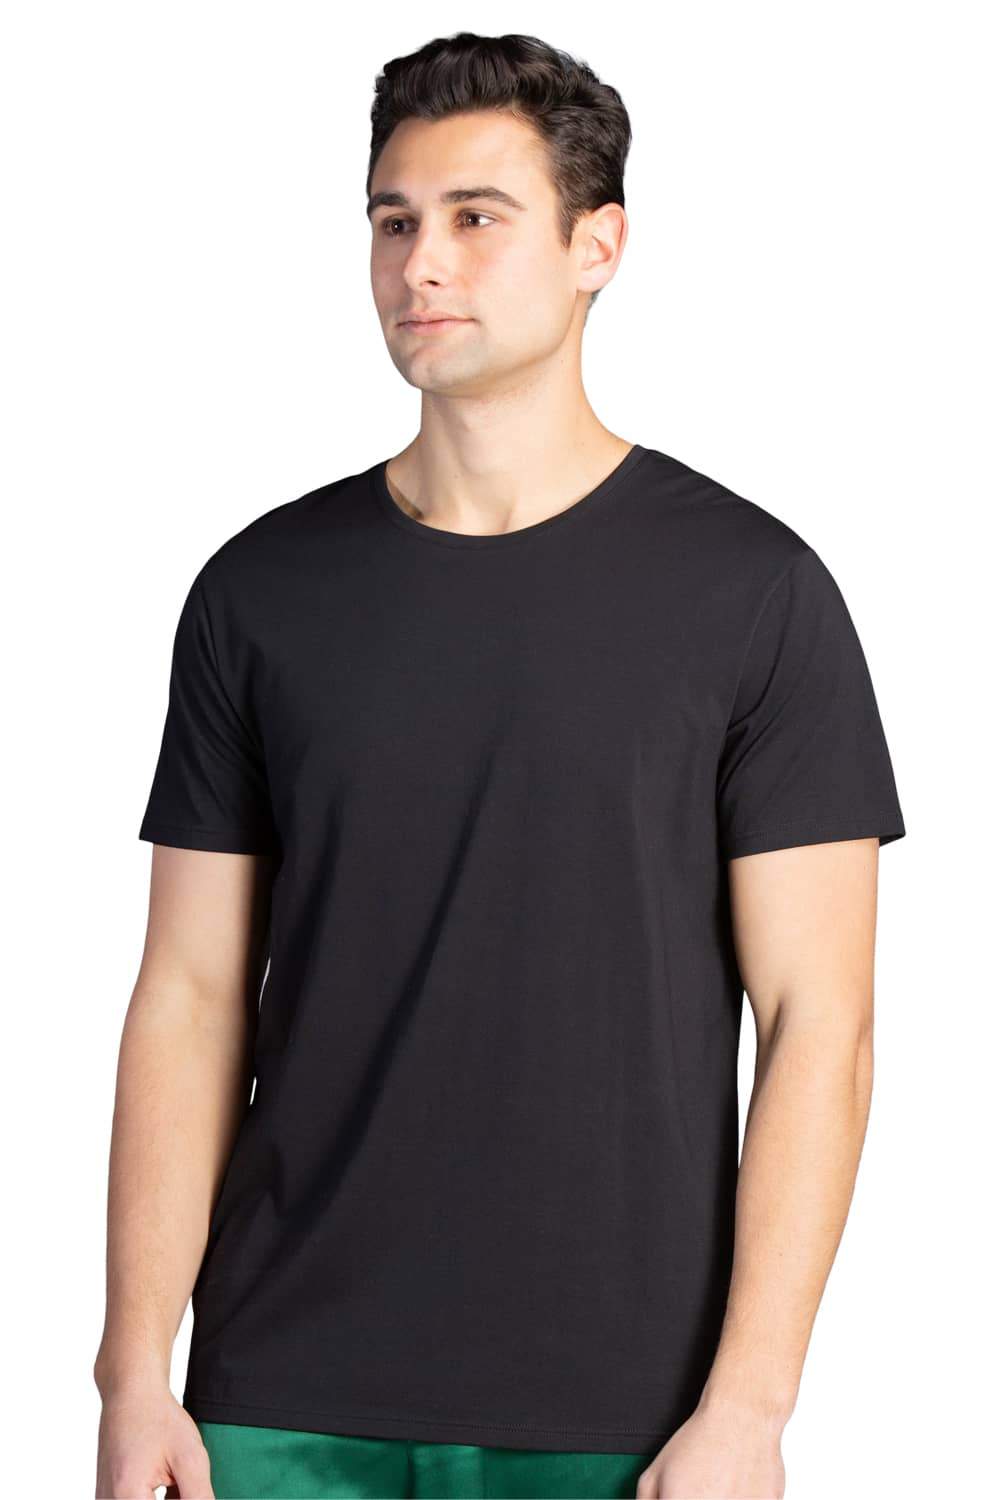 Men's Classic Fit Soft Stretch Crew Neck Undershirt Mens>Casual>Tops Fishers Finery Black Small Single Pack